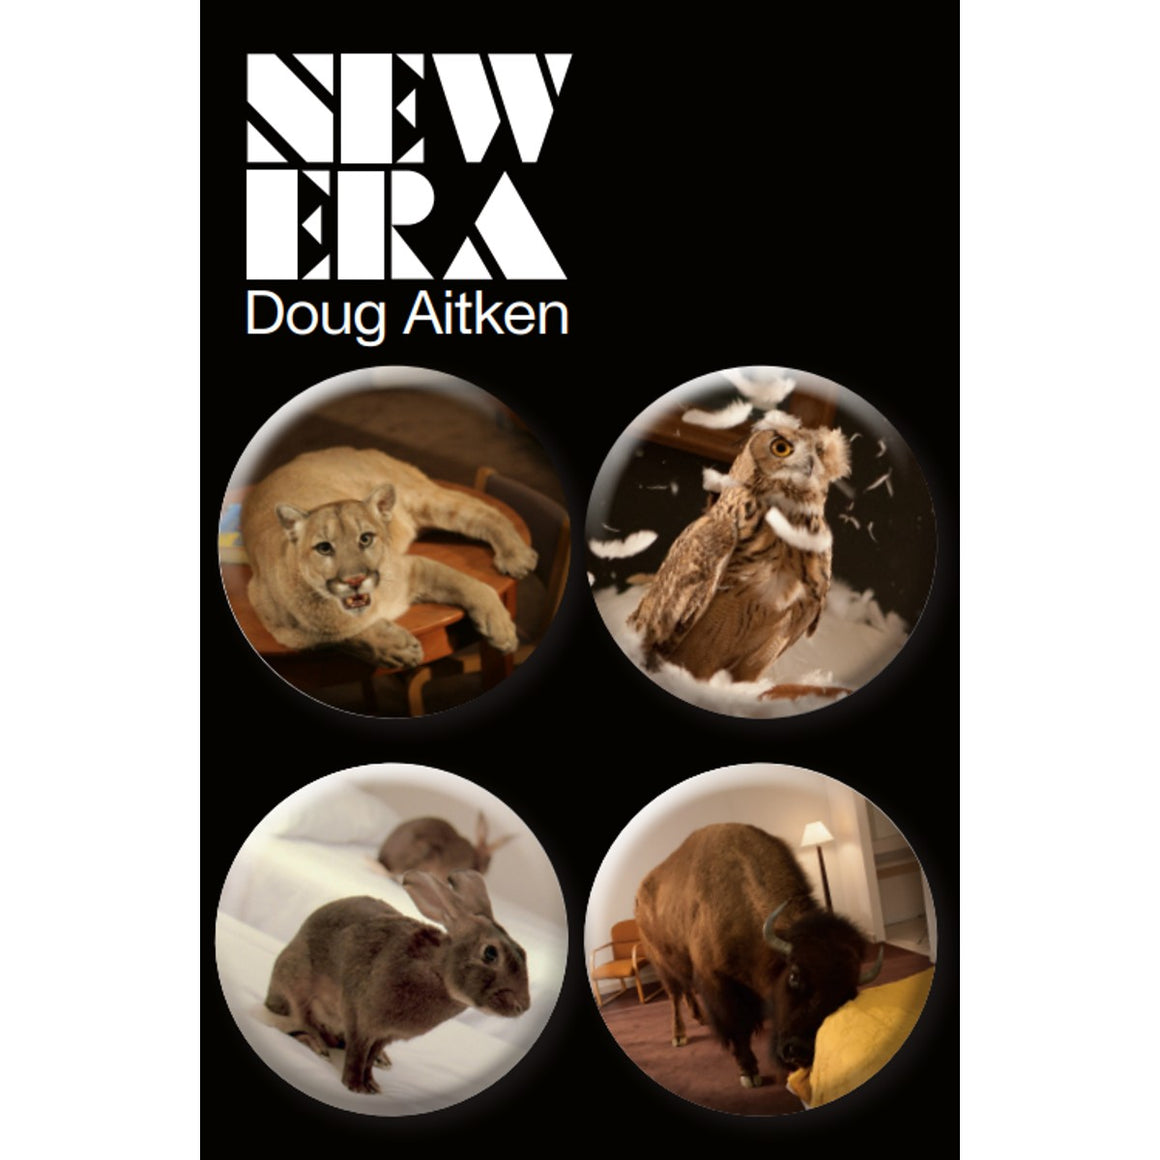 On a black packaging is four circular badges with a different photograph of an animal; a tigress, an owl, two rabbits, a Highland bull. Above the badges on the top left corner is "new era", capitalised in white block font with "Doug Aitken" in sans-serif font below it. 